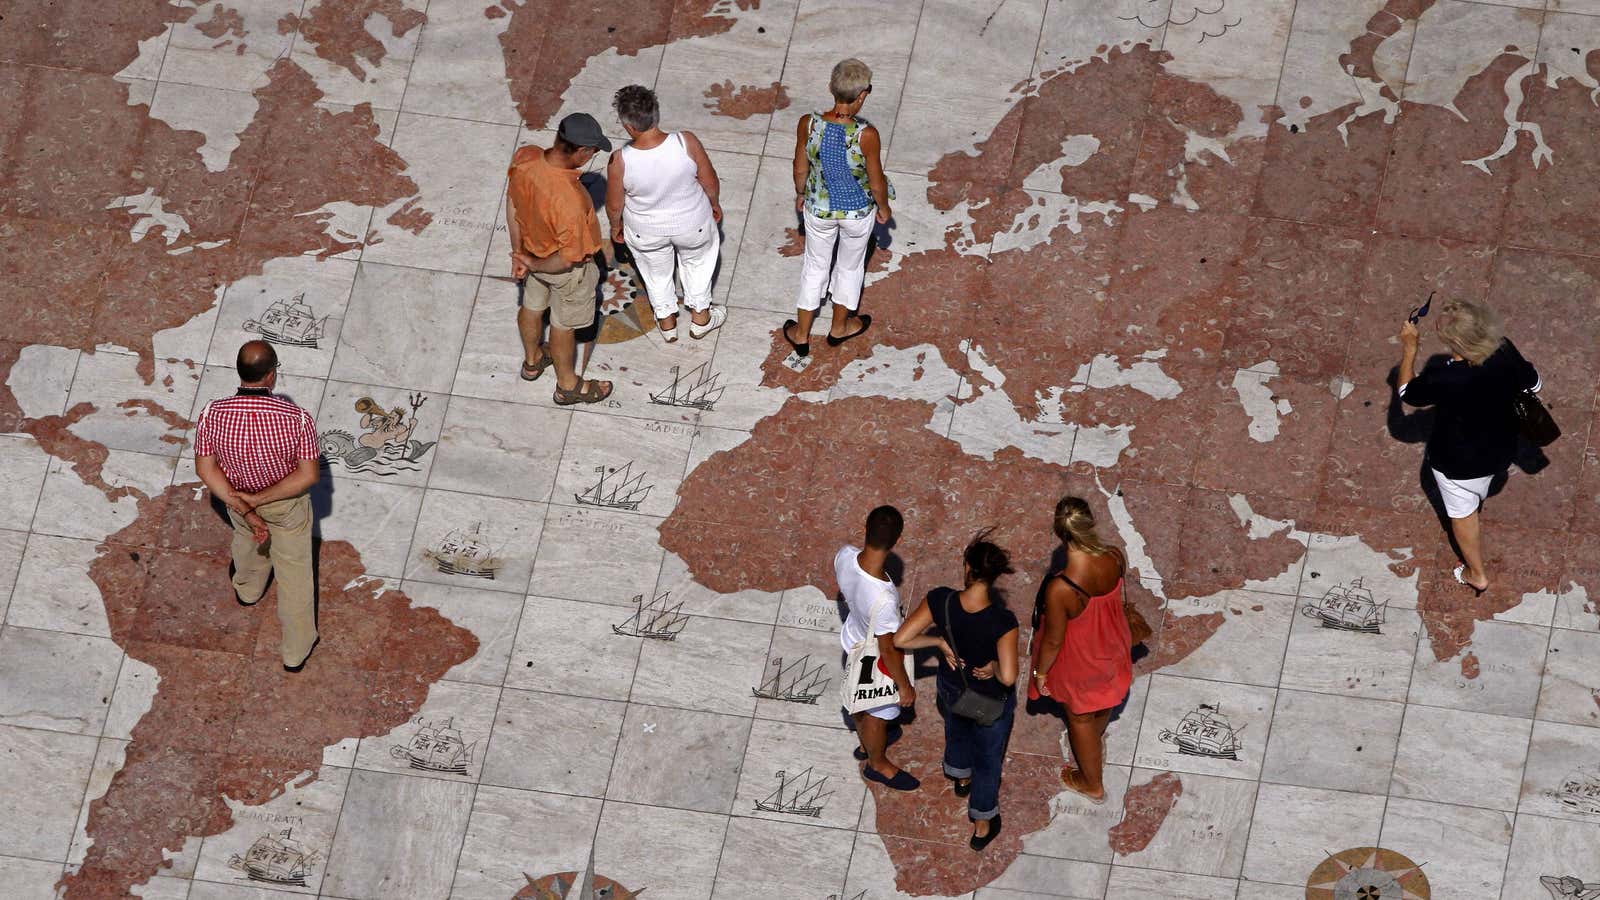 People walk over a world map engraved in marble in Lisbon September 14, 2011. Global markets have been roiled since the end of July by…